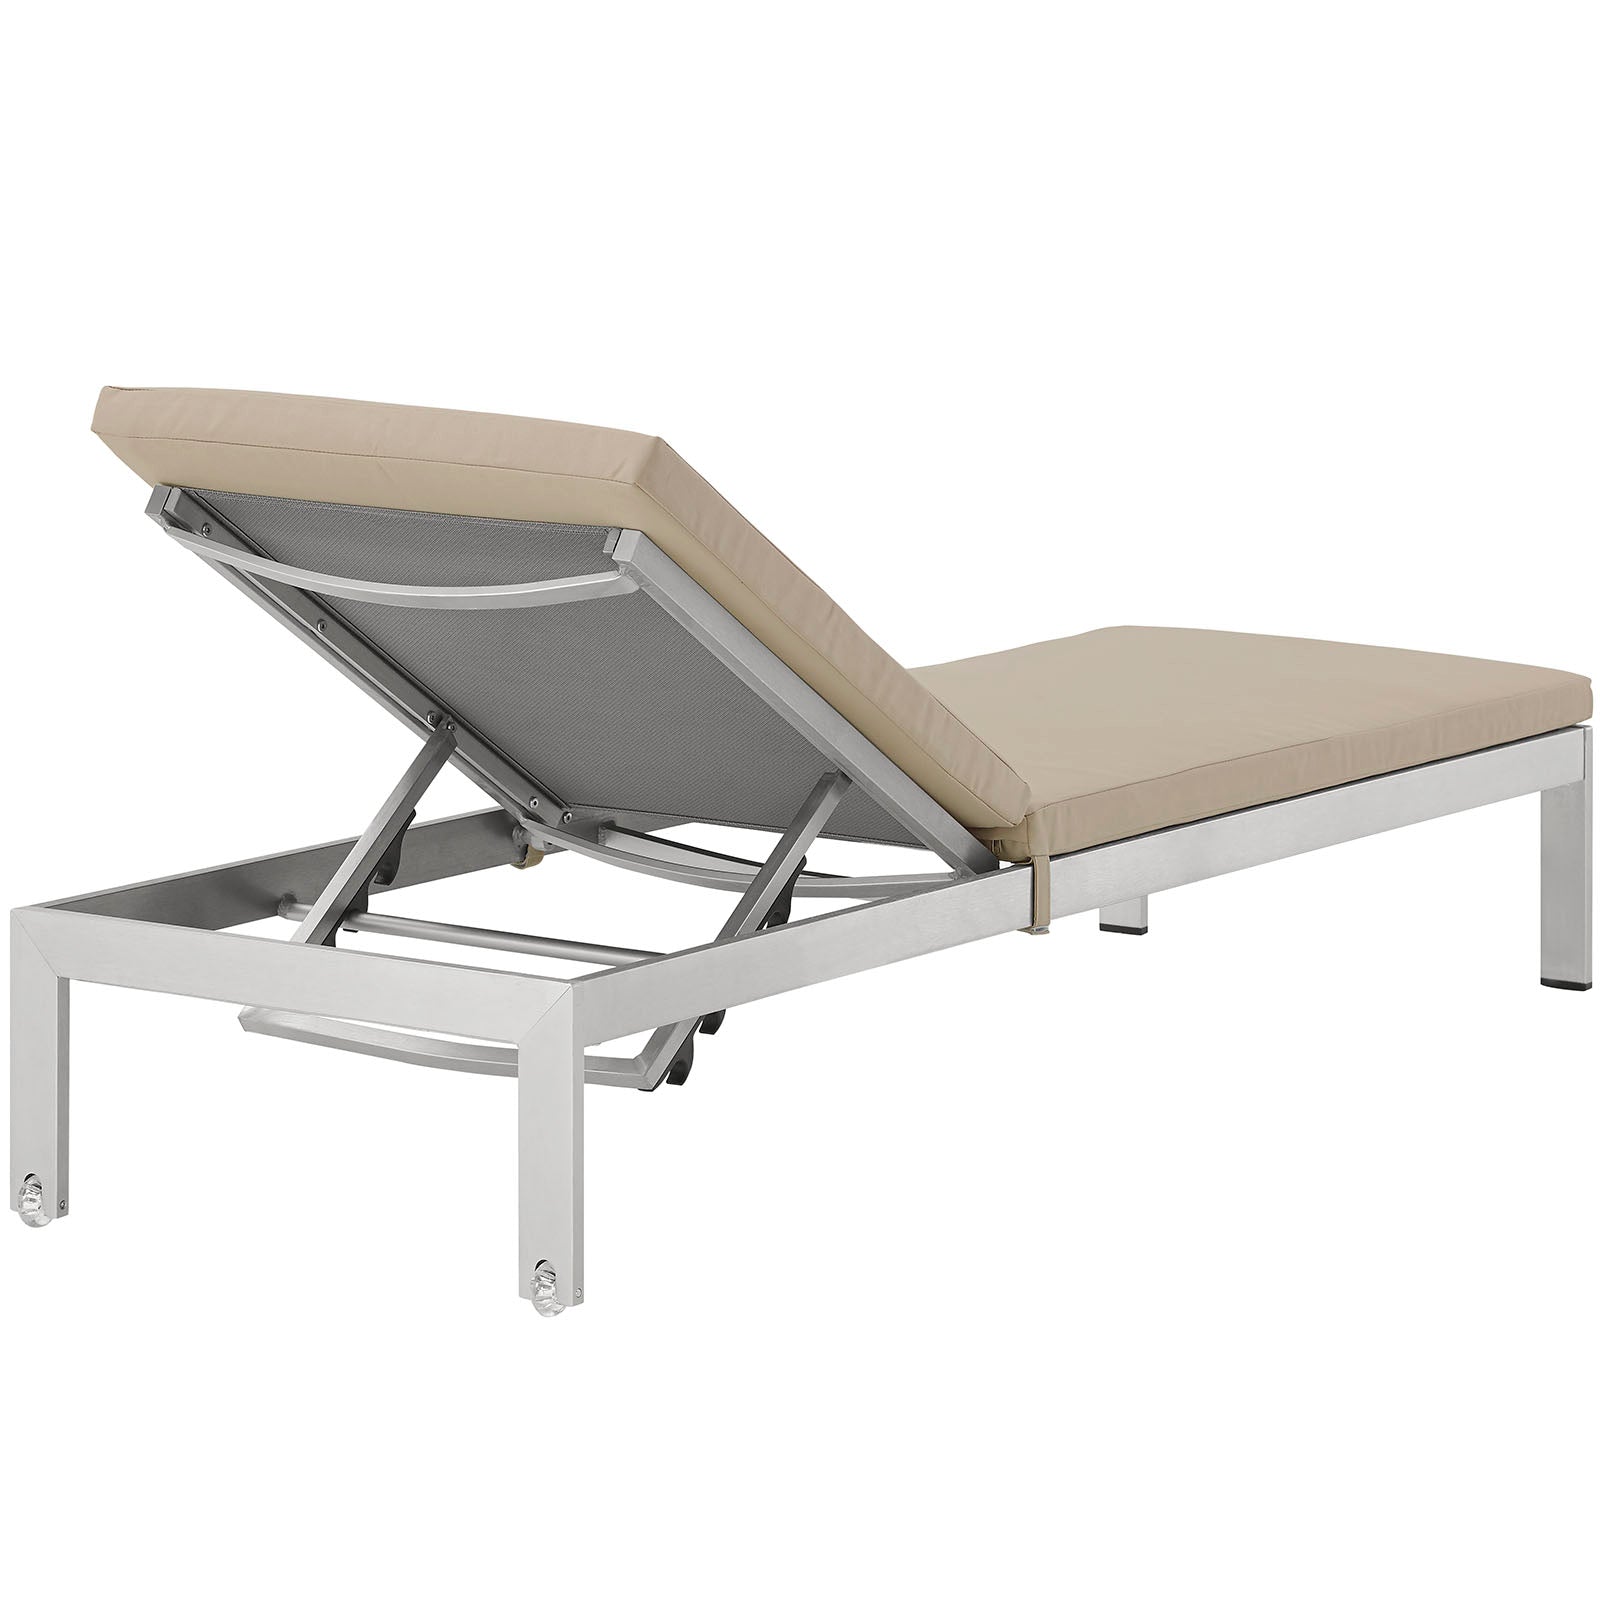 Shore Outdoor Patio Chaise with Cushions Beige